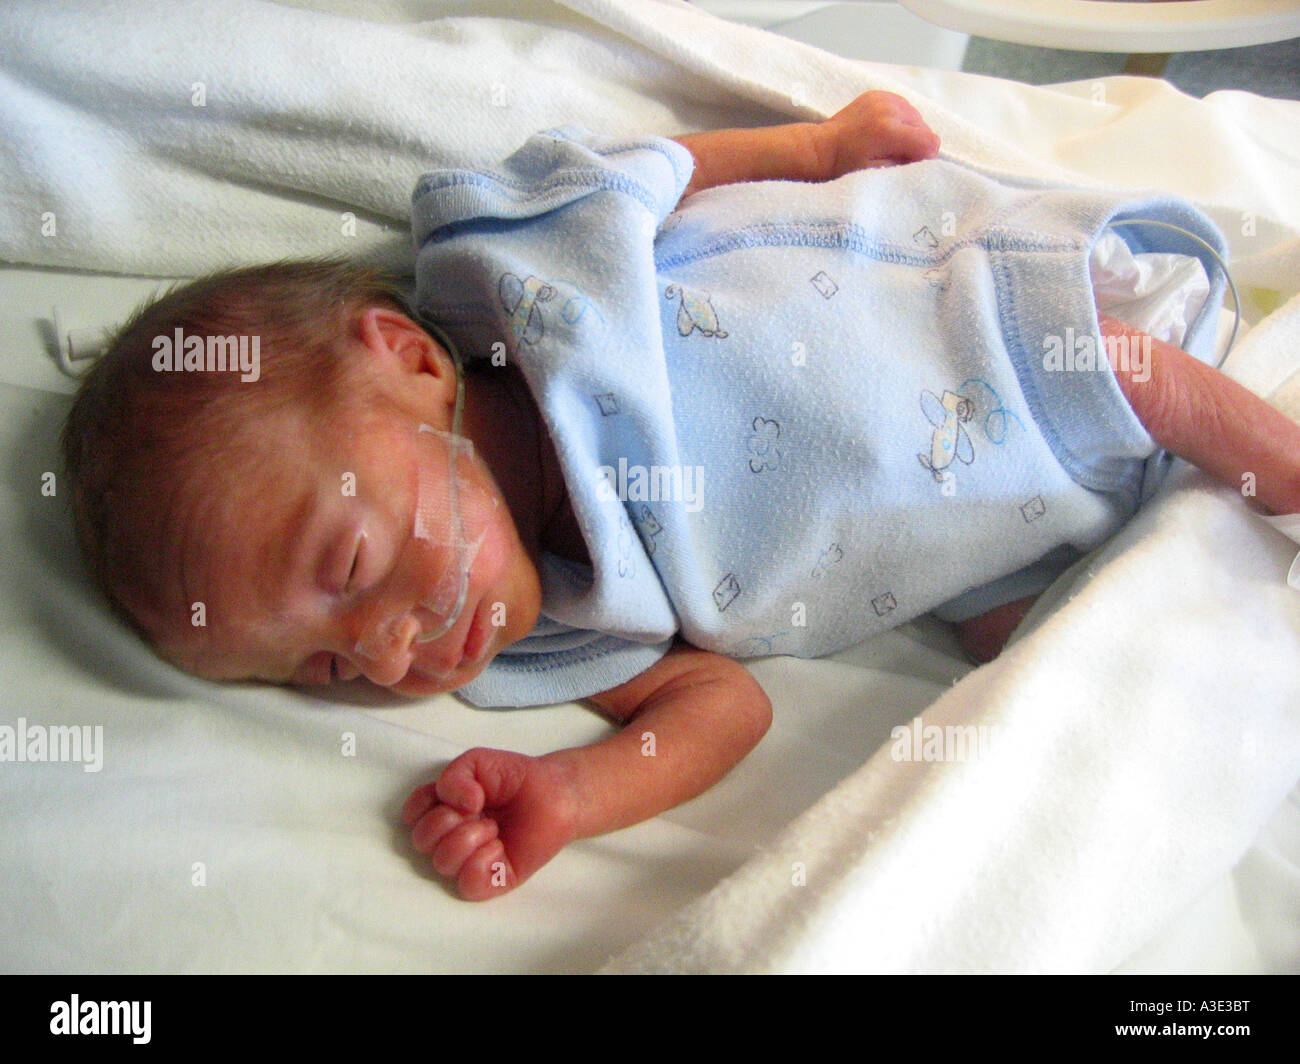 Premature baby boy born at 28 weeks gestation in an ...